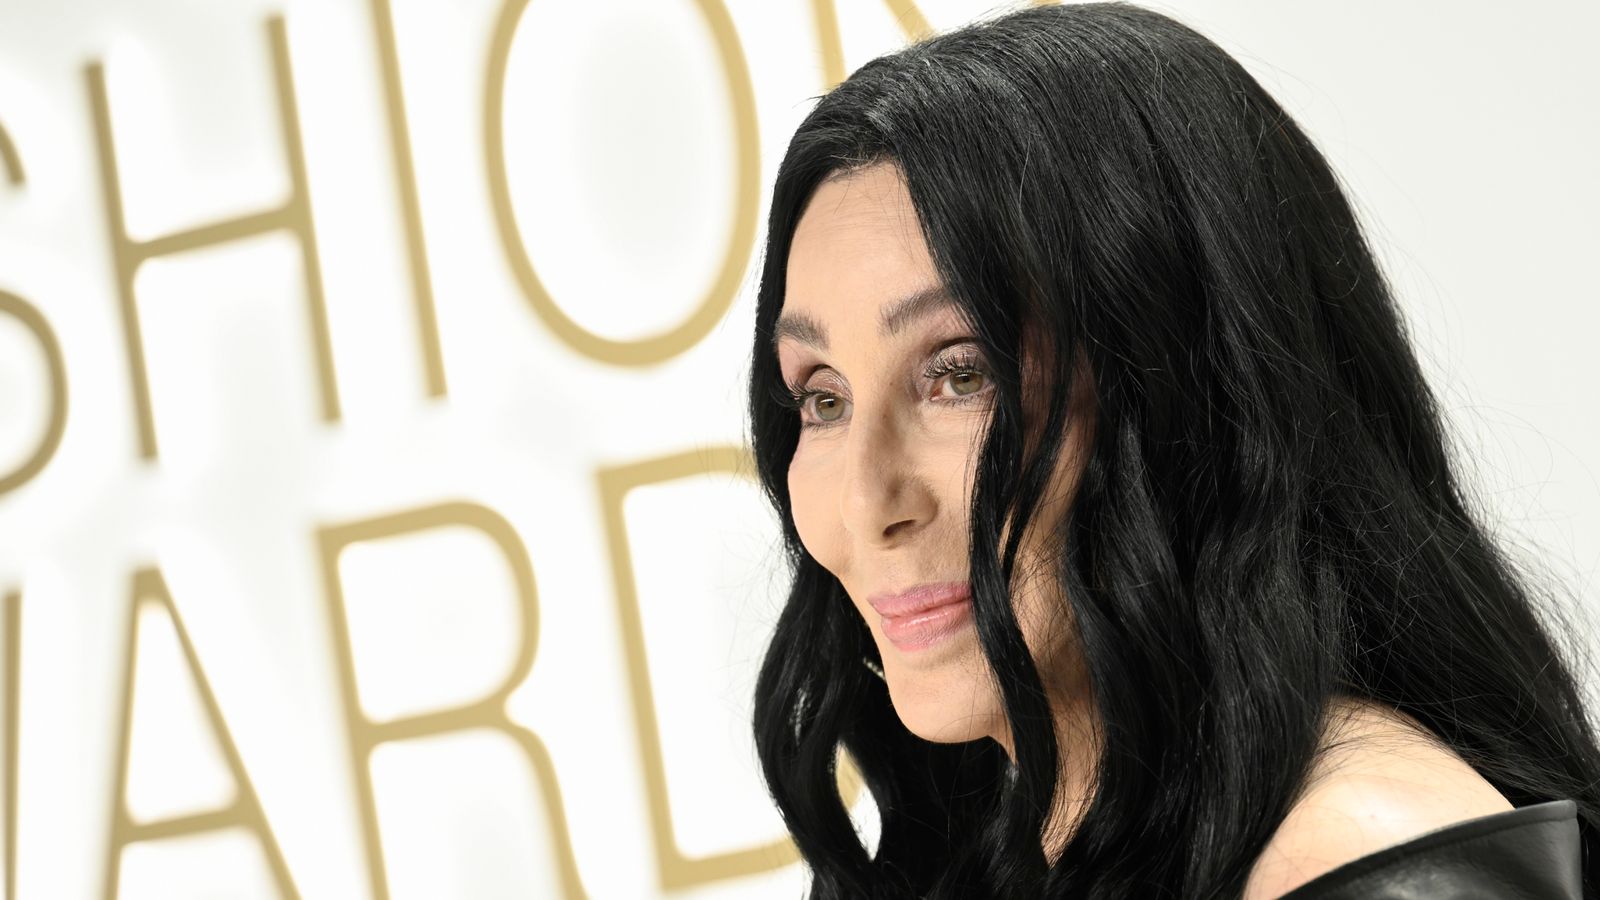 Cher, 76, fuels speculation she is engaged to boyfriend, 36, with diamond ring photo